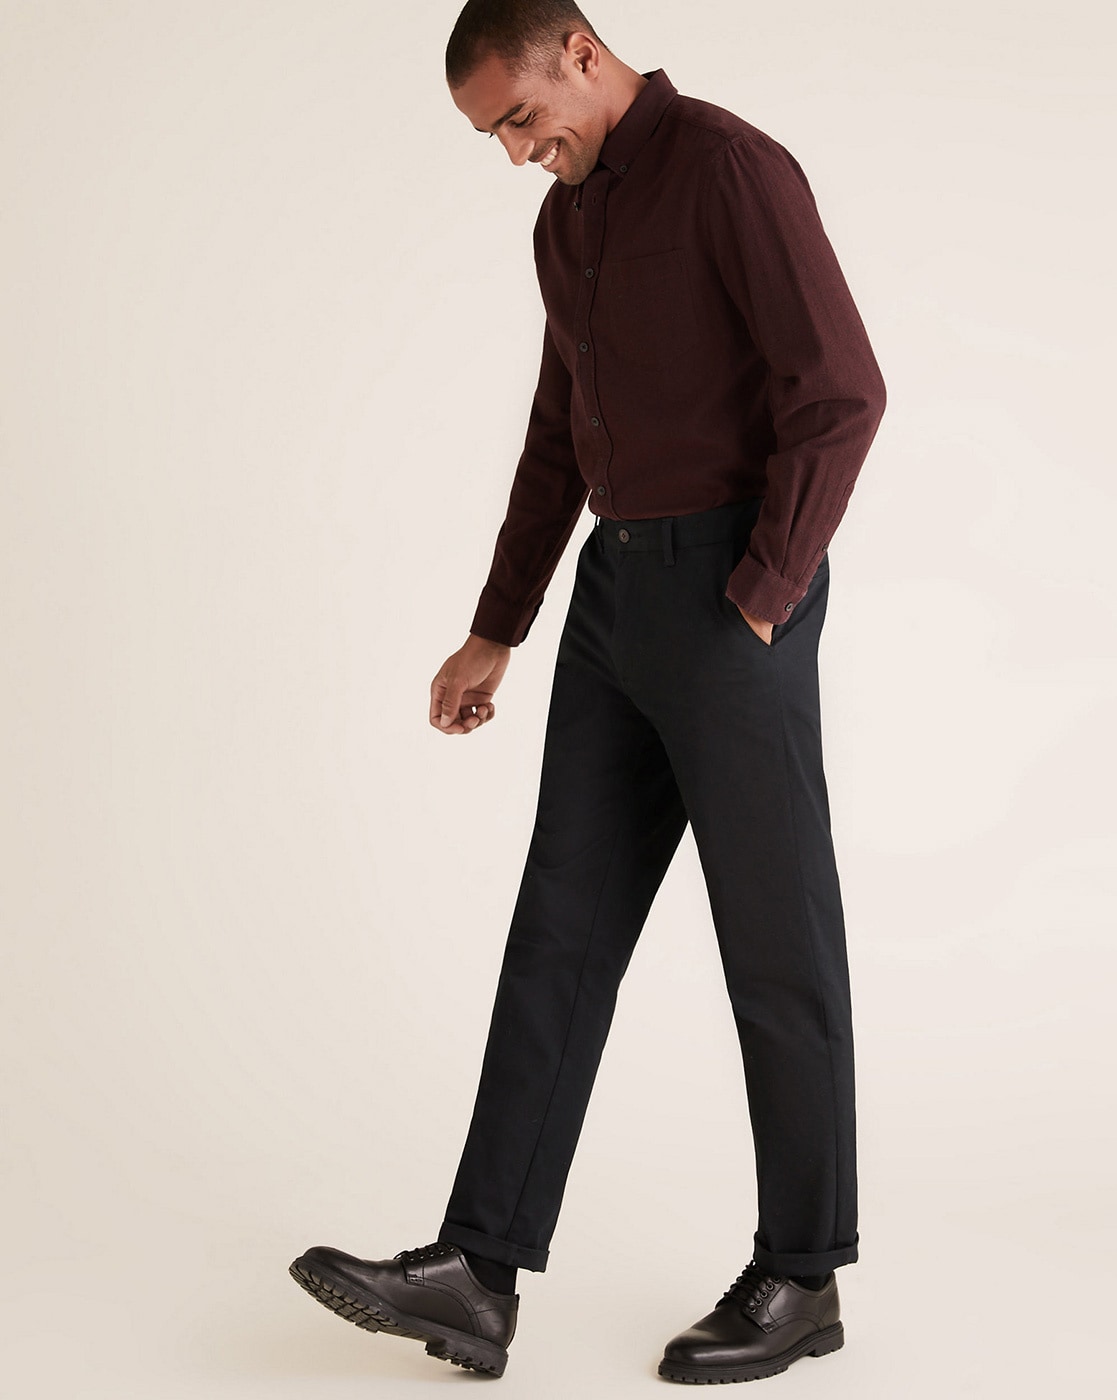 Black Pants and Brown Shoes: A Style Guide to Pull Off the Ultimate Look